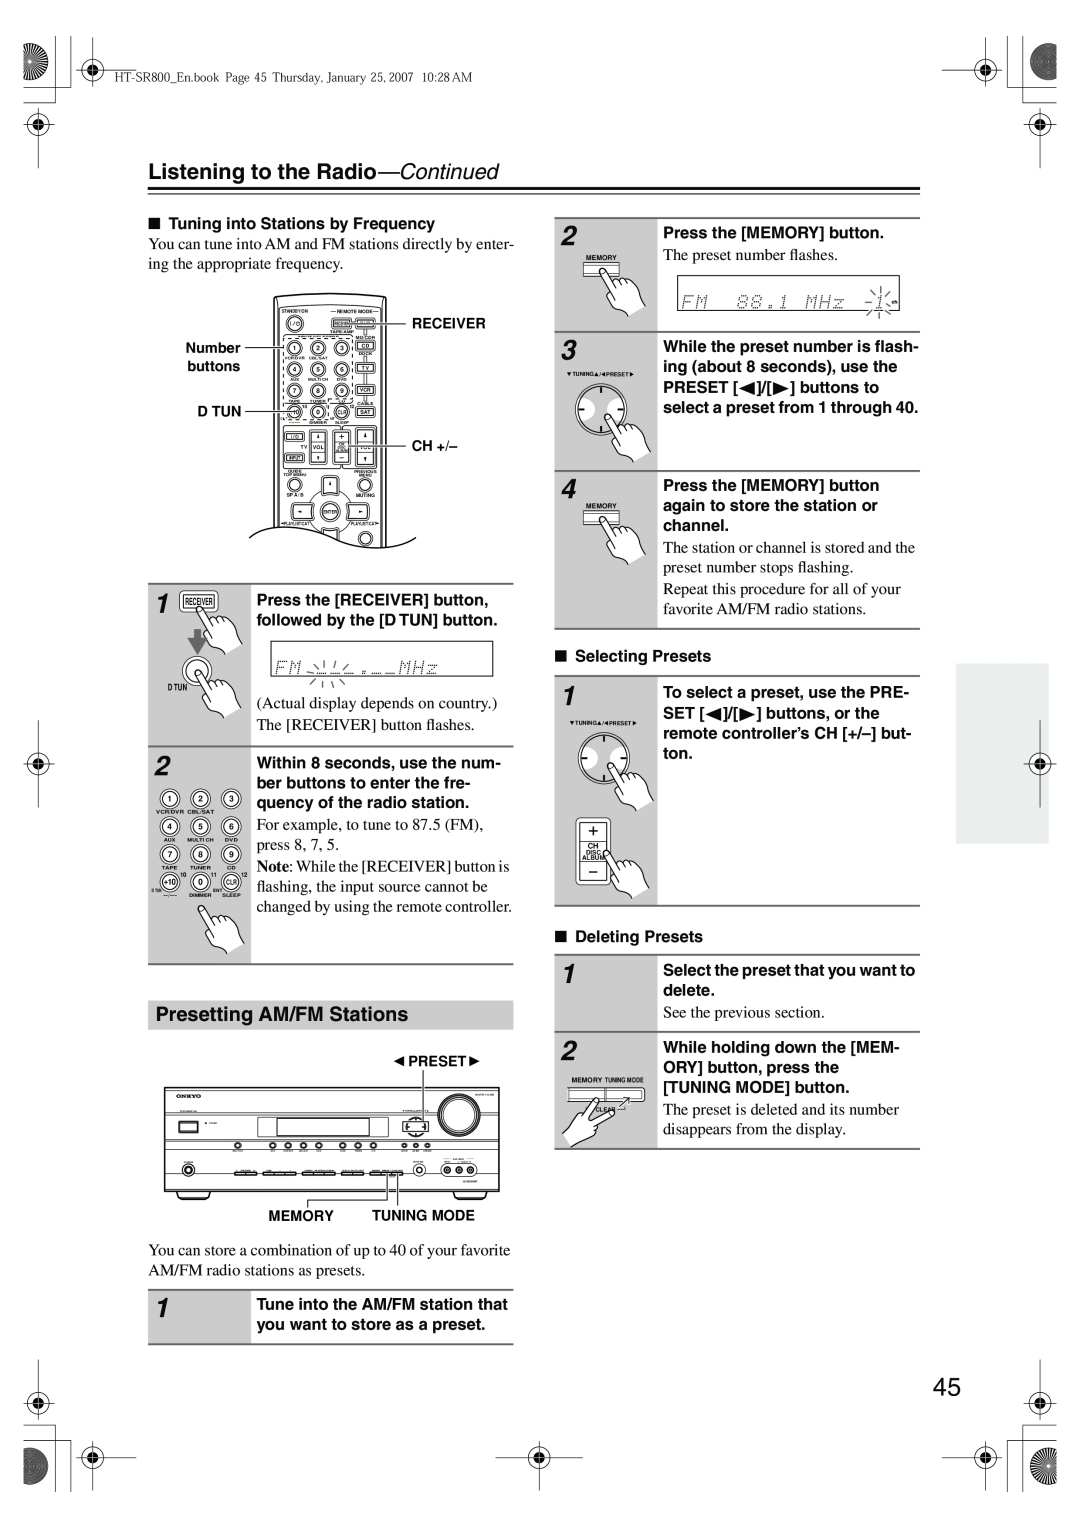 Onkyo HT-SR800 instruction manual Listening to the Radio-Continued, Presetting AM/FM Stations, The preset number ﬂashes 